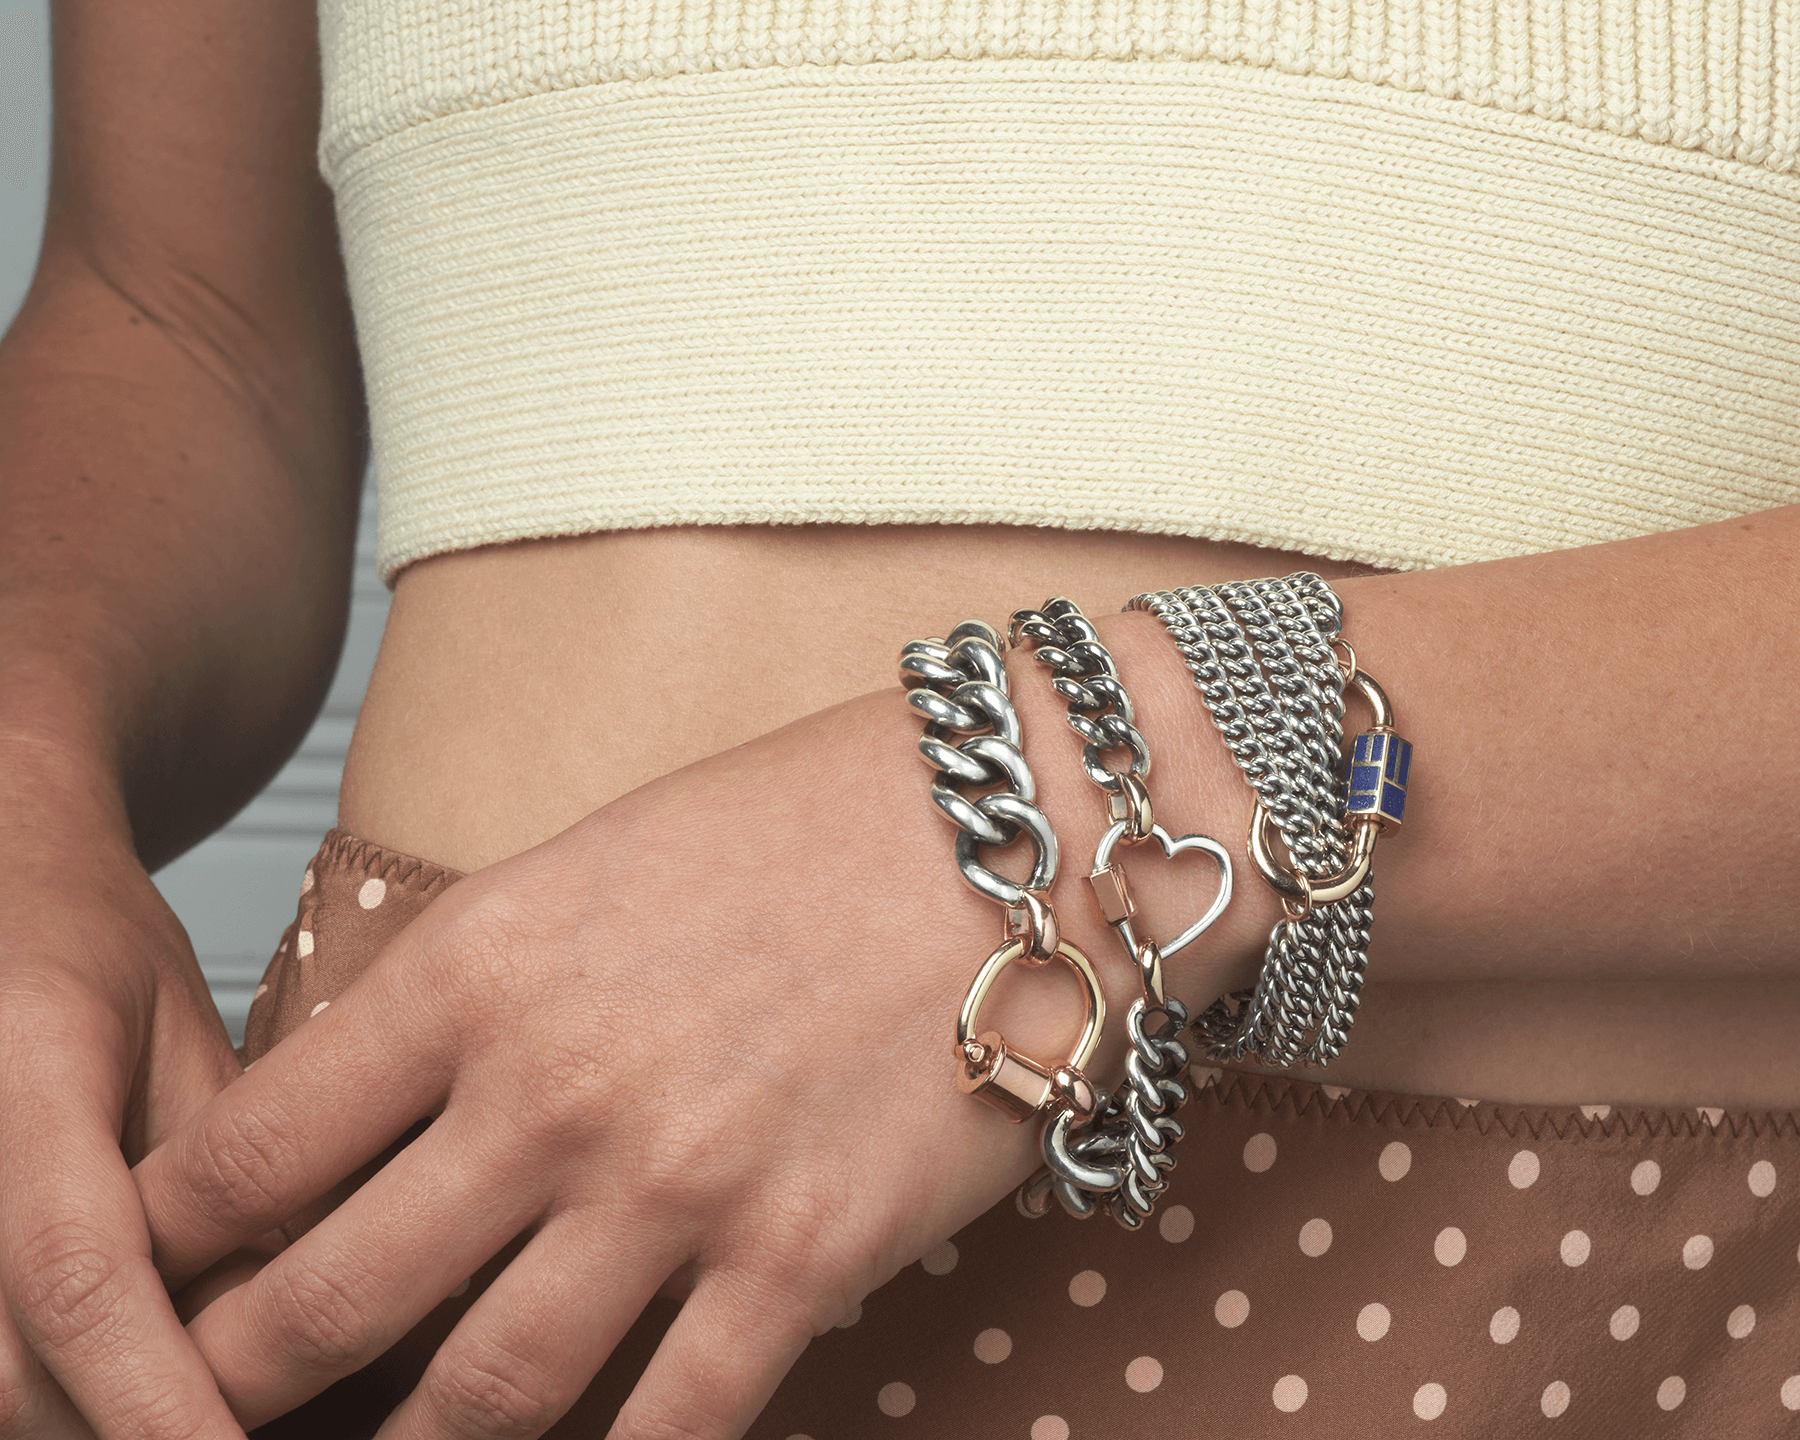 Close up of woman's wrist wearing multiple bracelets including mixed metal chain bracelet